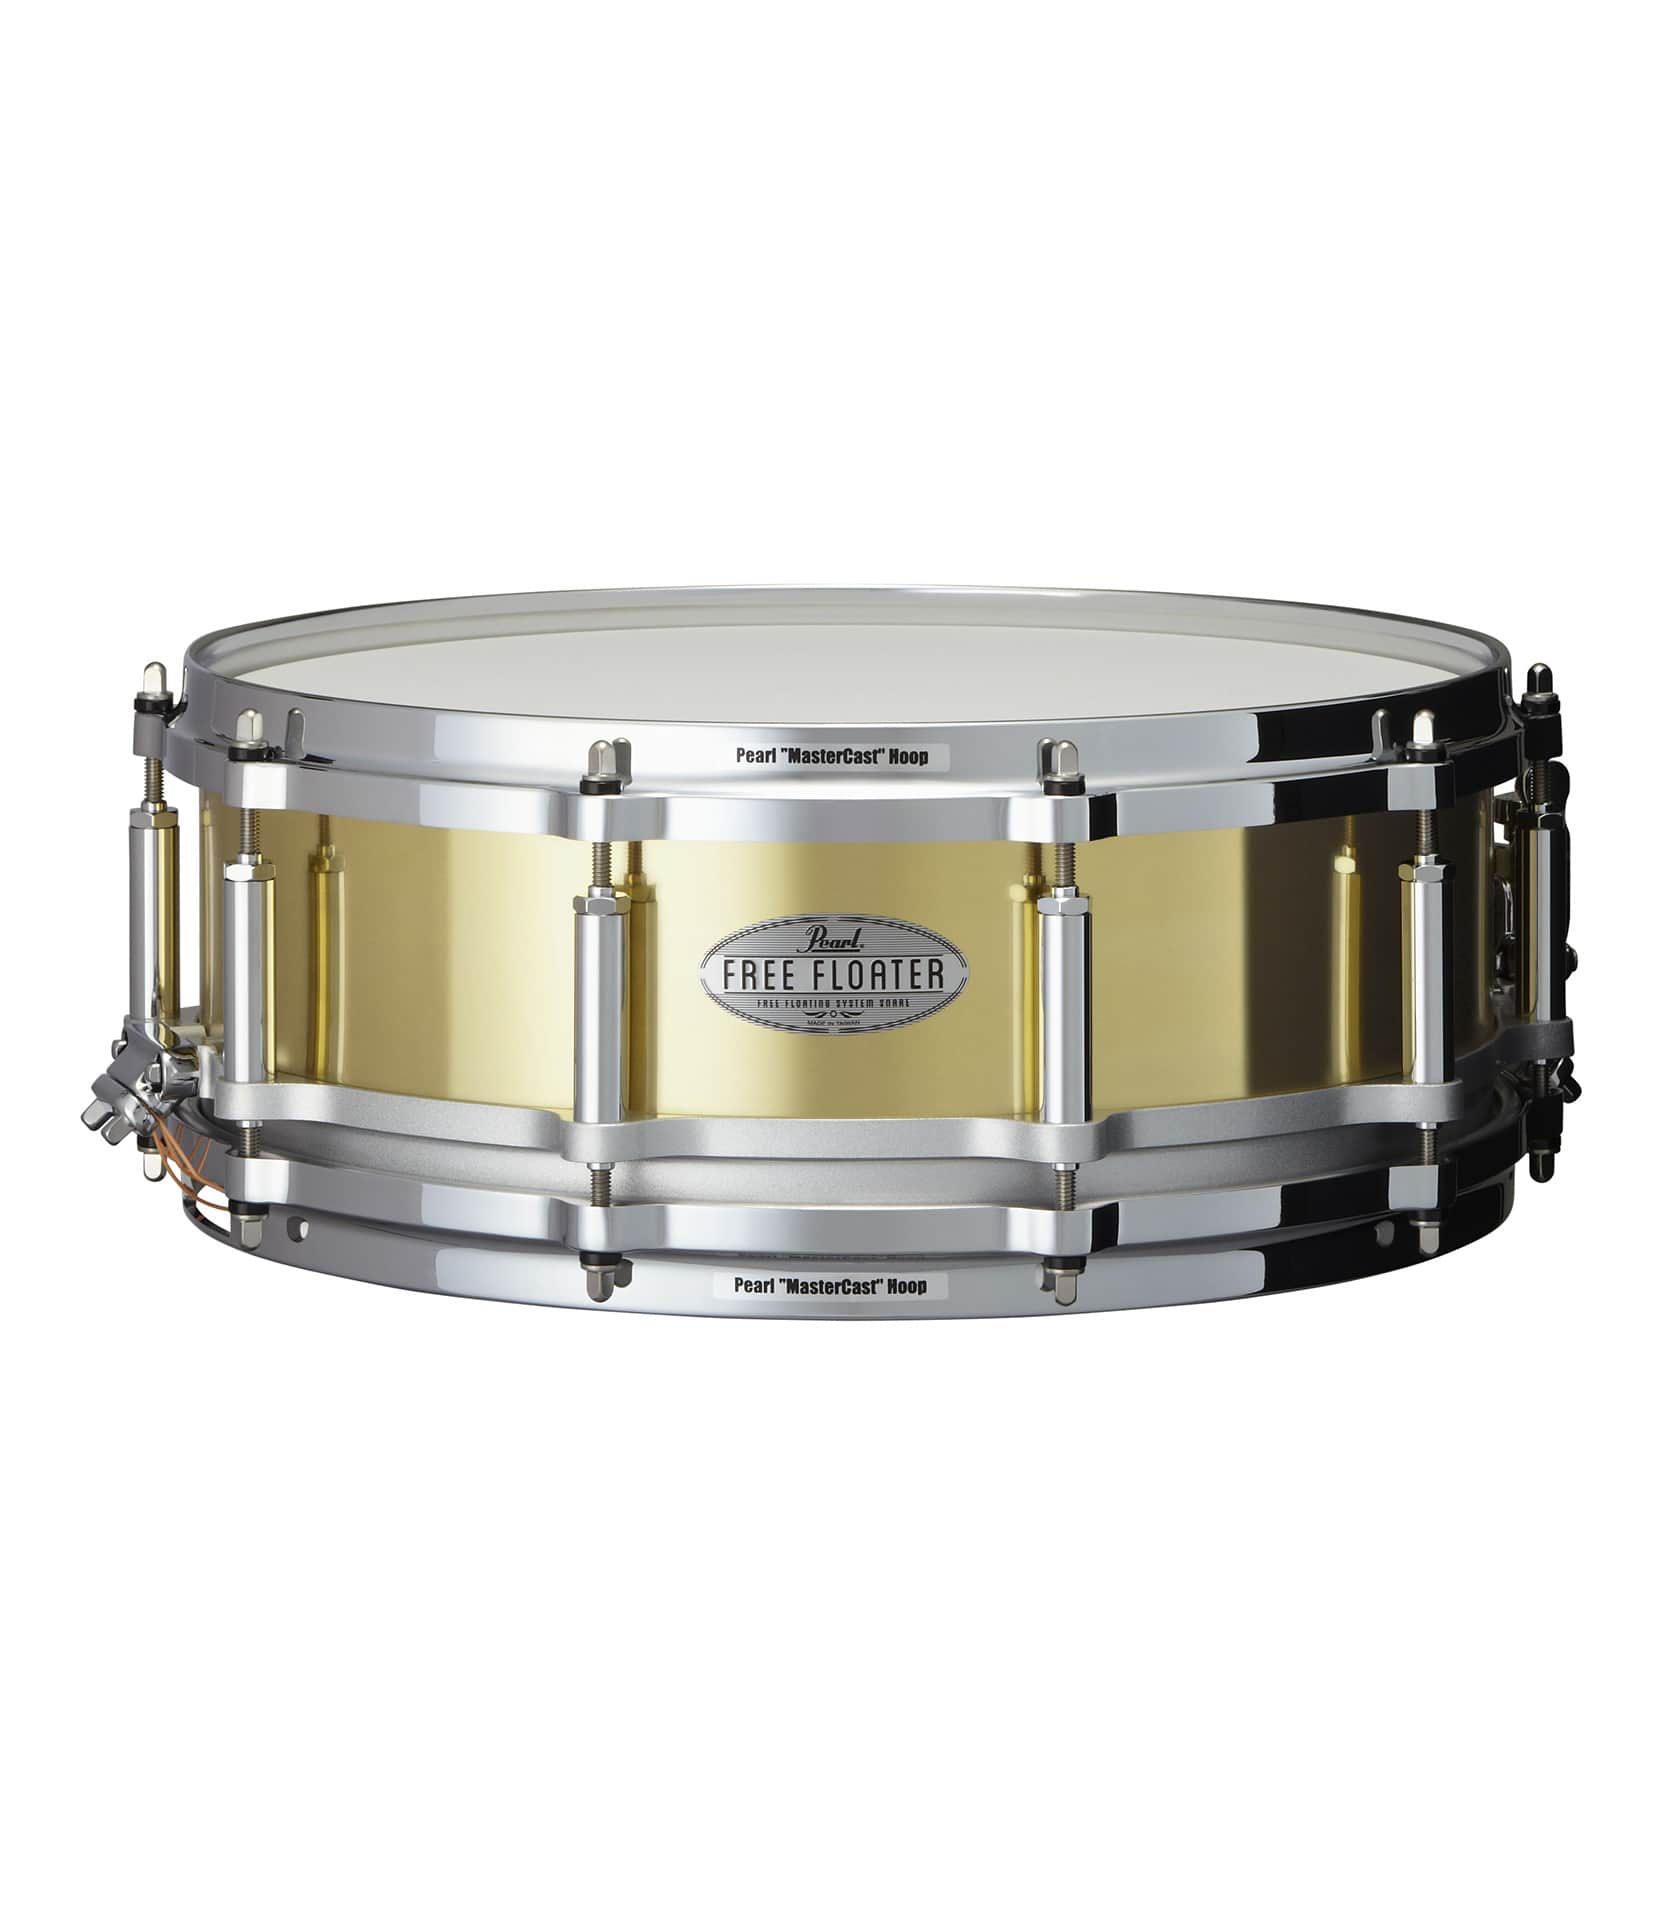 Pearl - FTBR1450 14 x 5 Inches Free Floater Snare Drum